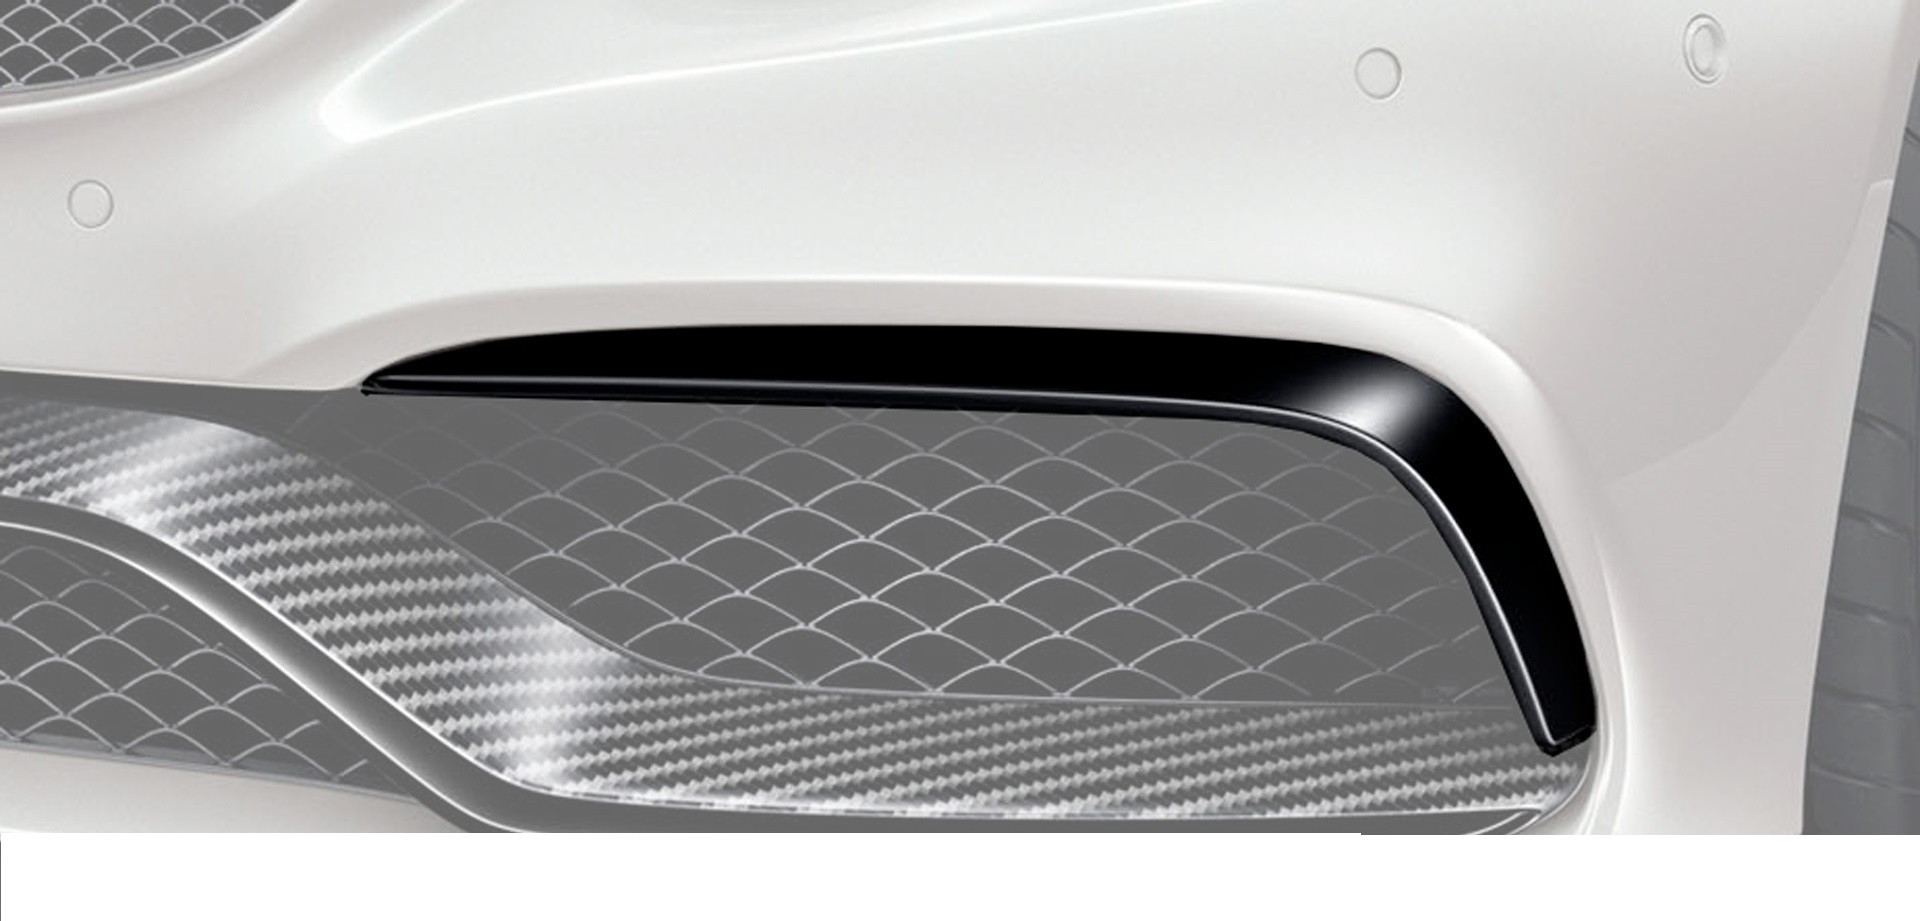 Hodoor Performance Carbon fiber front bumper air intakes 63 AMG Style for Mercedes C-class coupe C205